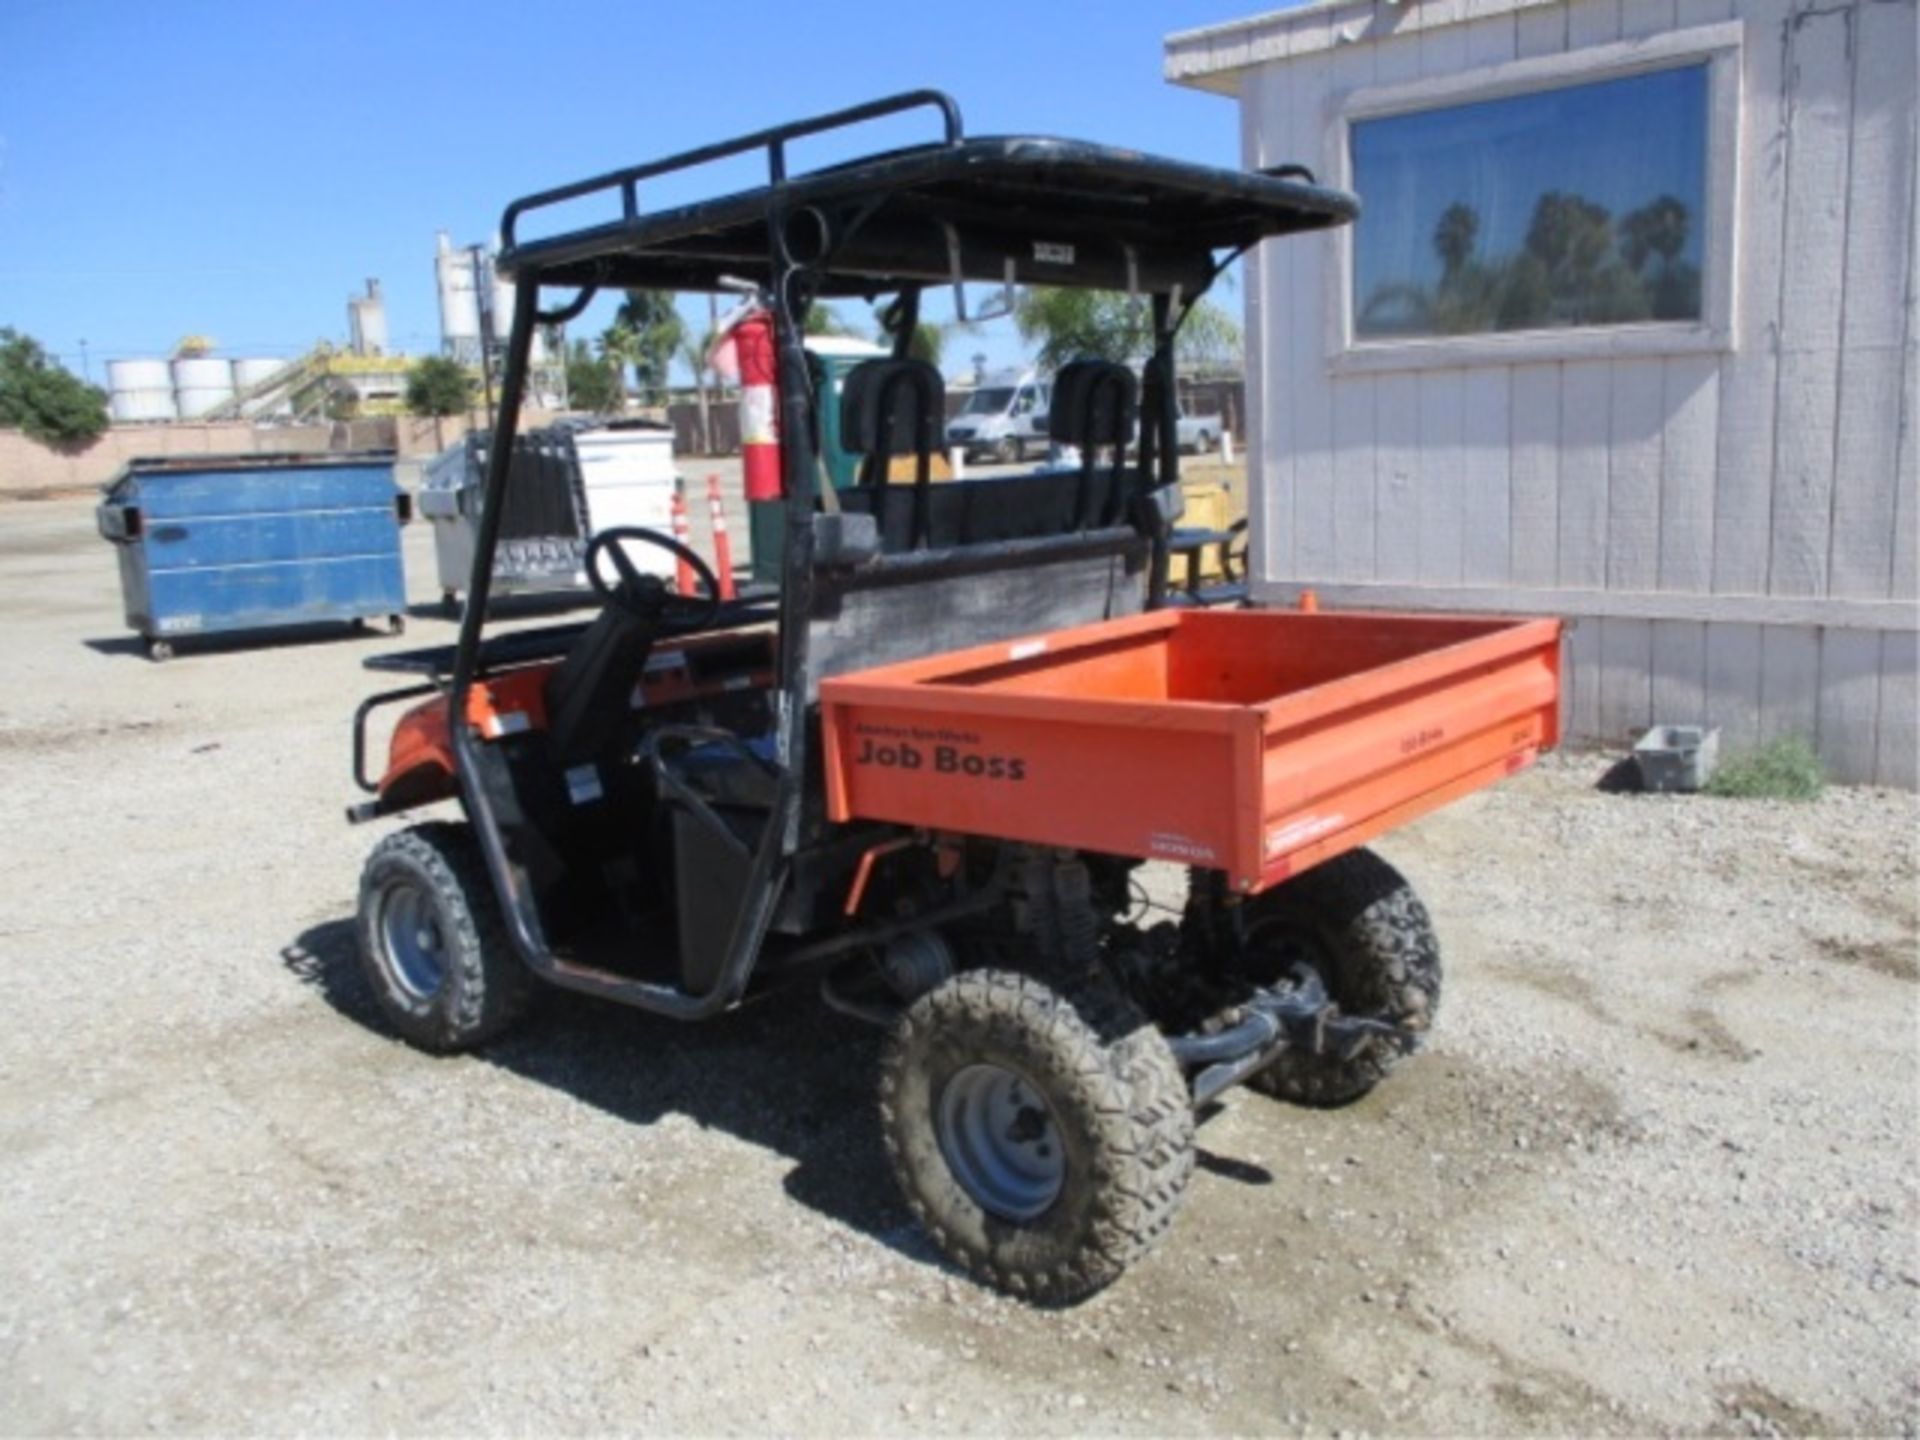 2008 American Sportworks Job Boss Utility Cart, Honda Gas, Rear Metal Dump Bed, Canopy, Tow Hitch, - Image 19 of 50